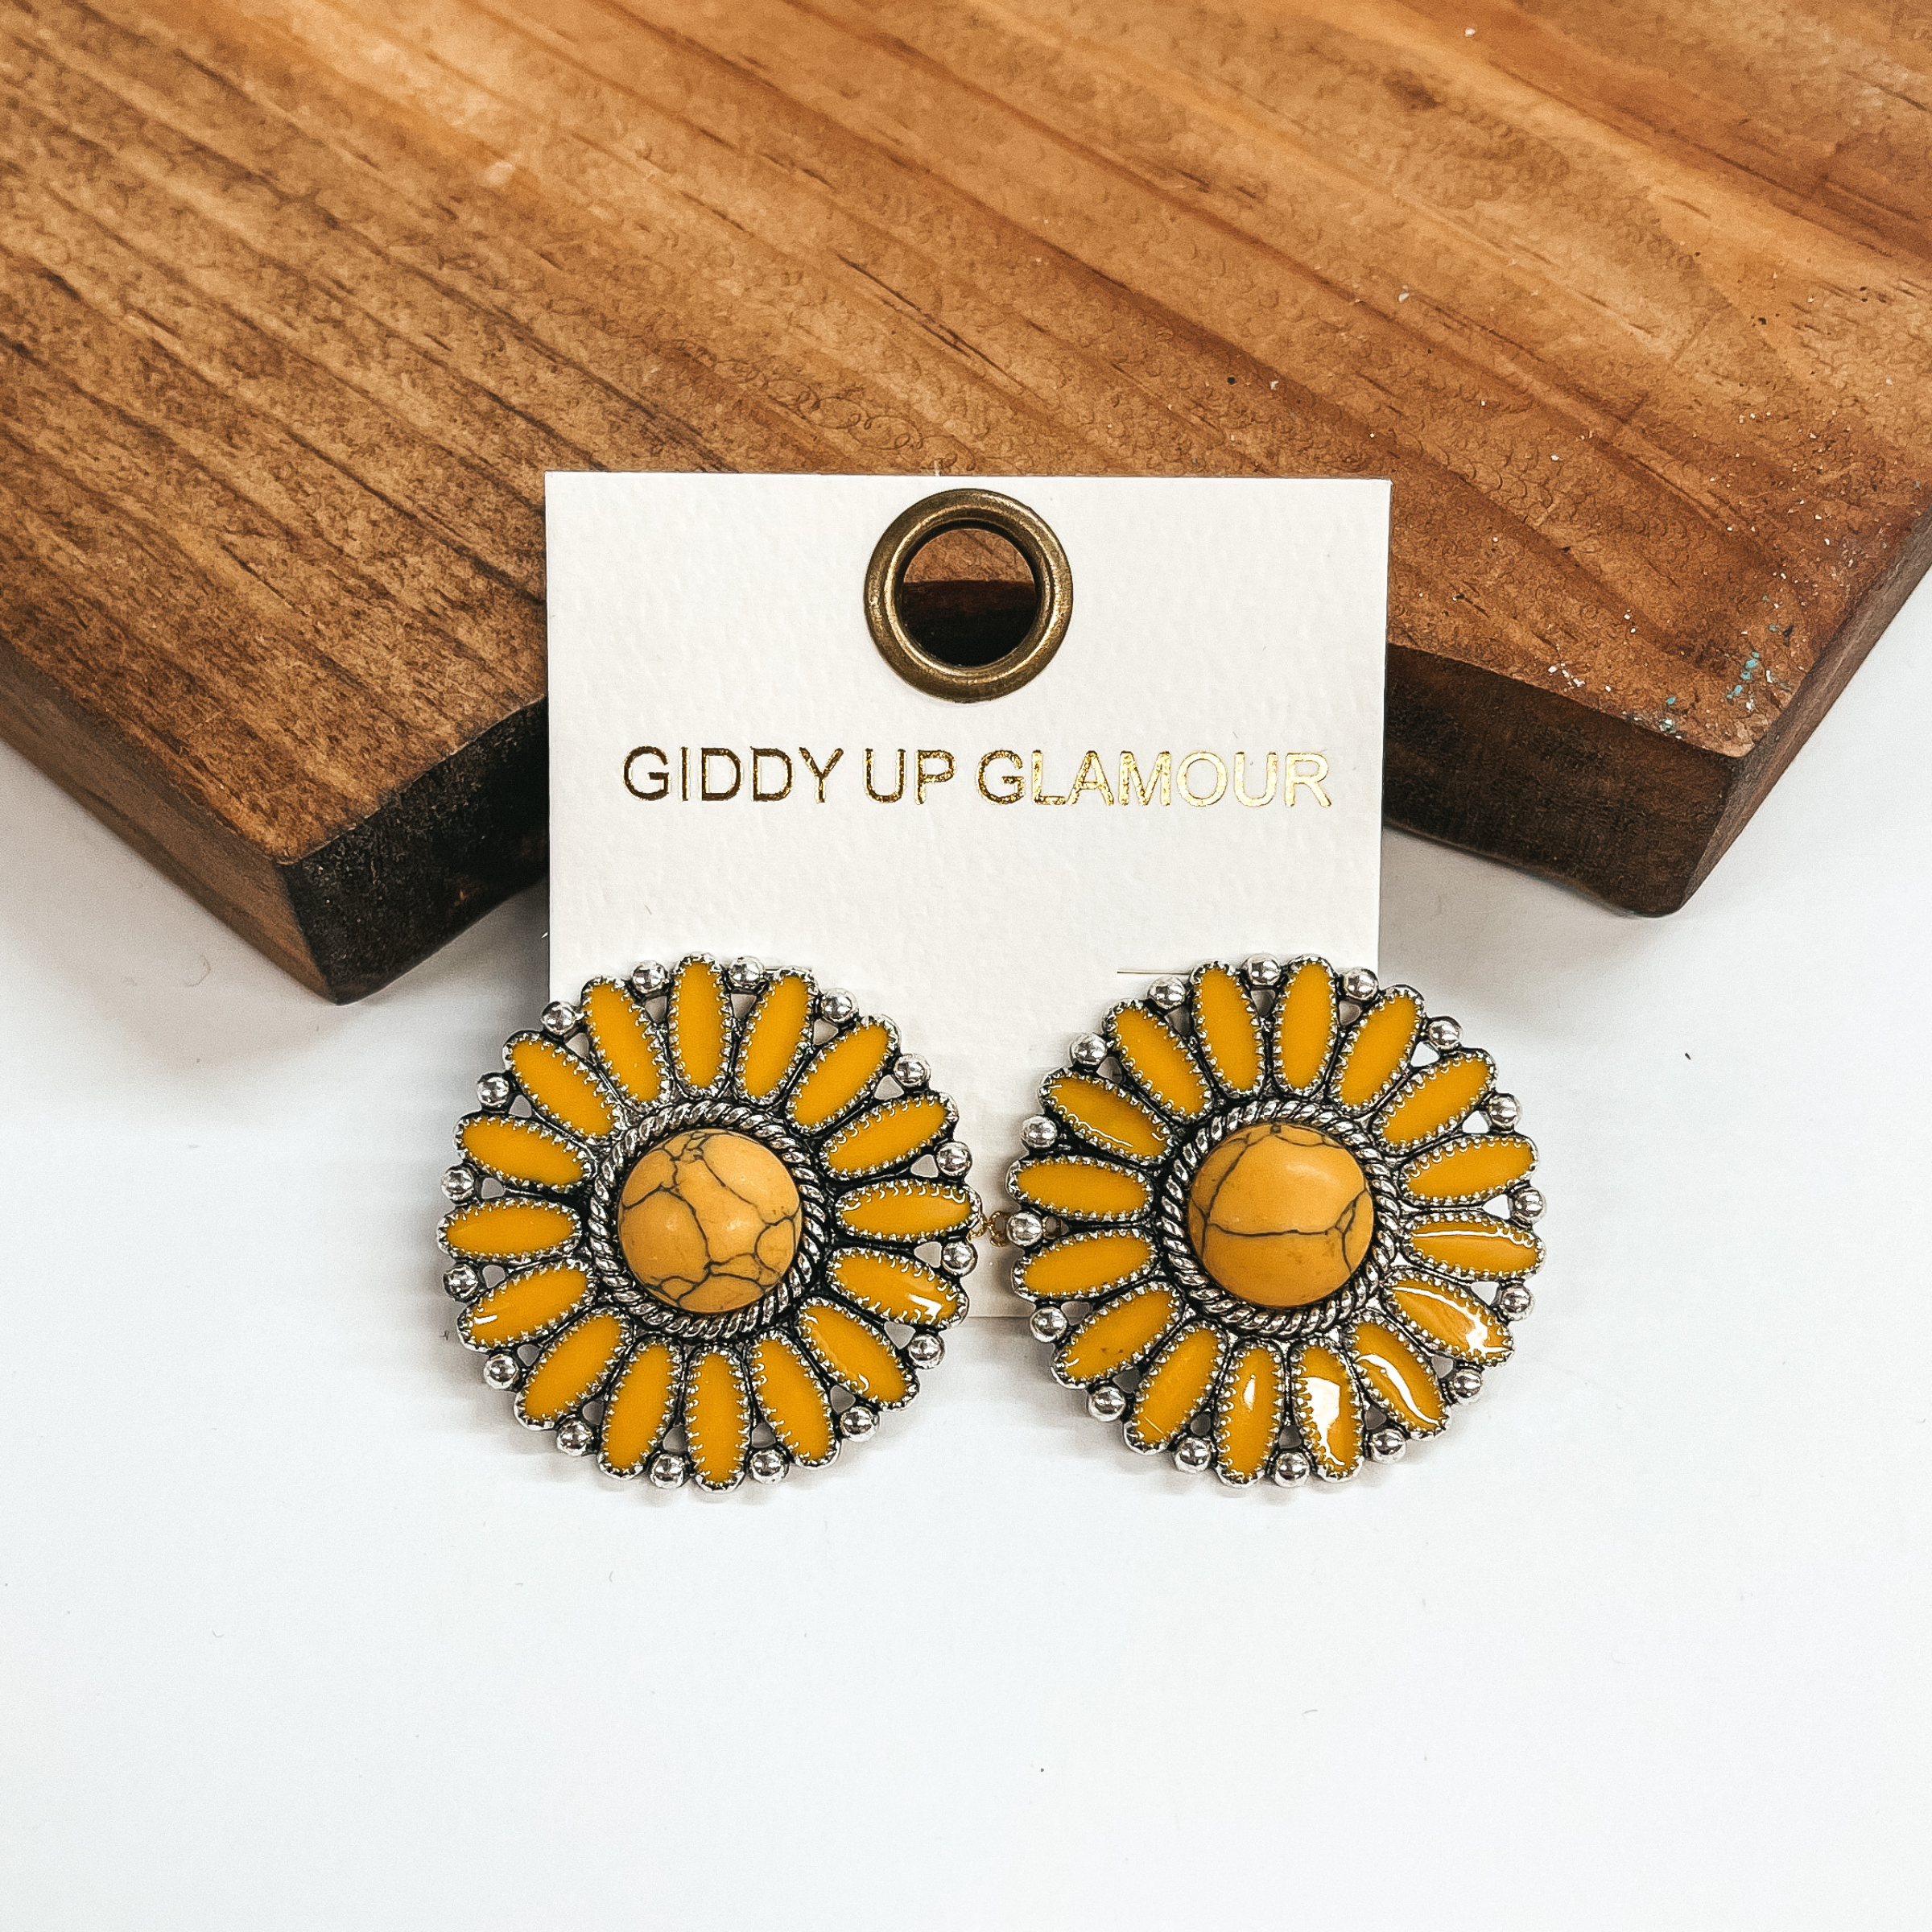 Yellow concho earrings with a center yellow stone  and silver outline. These earrings are pictured  leaning up against a brown block with a white  background.